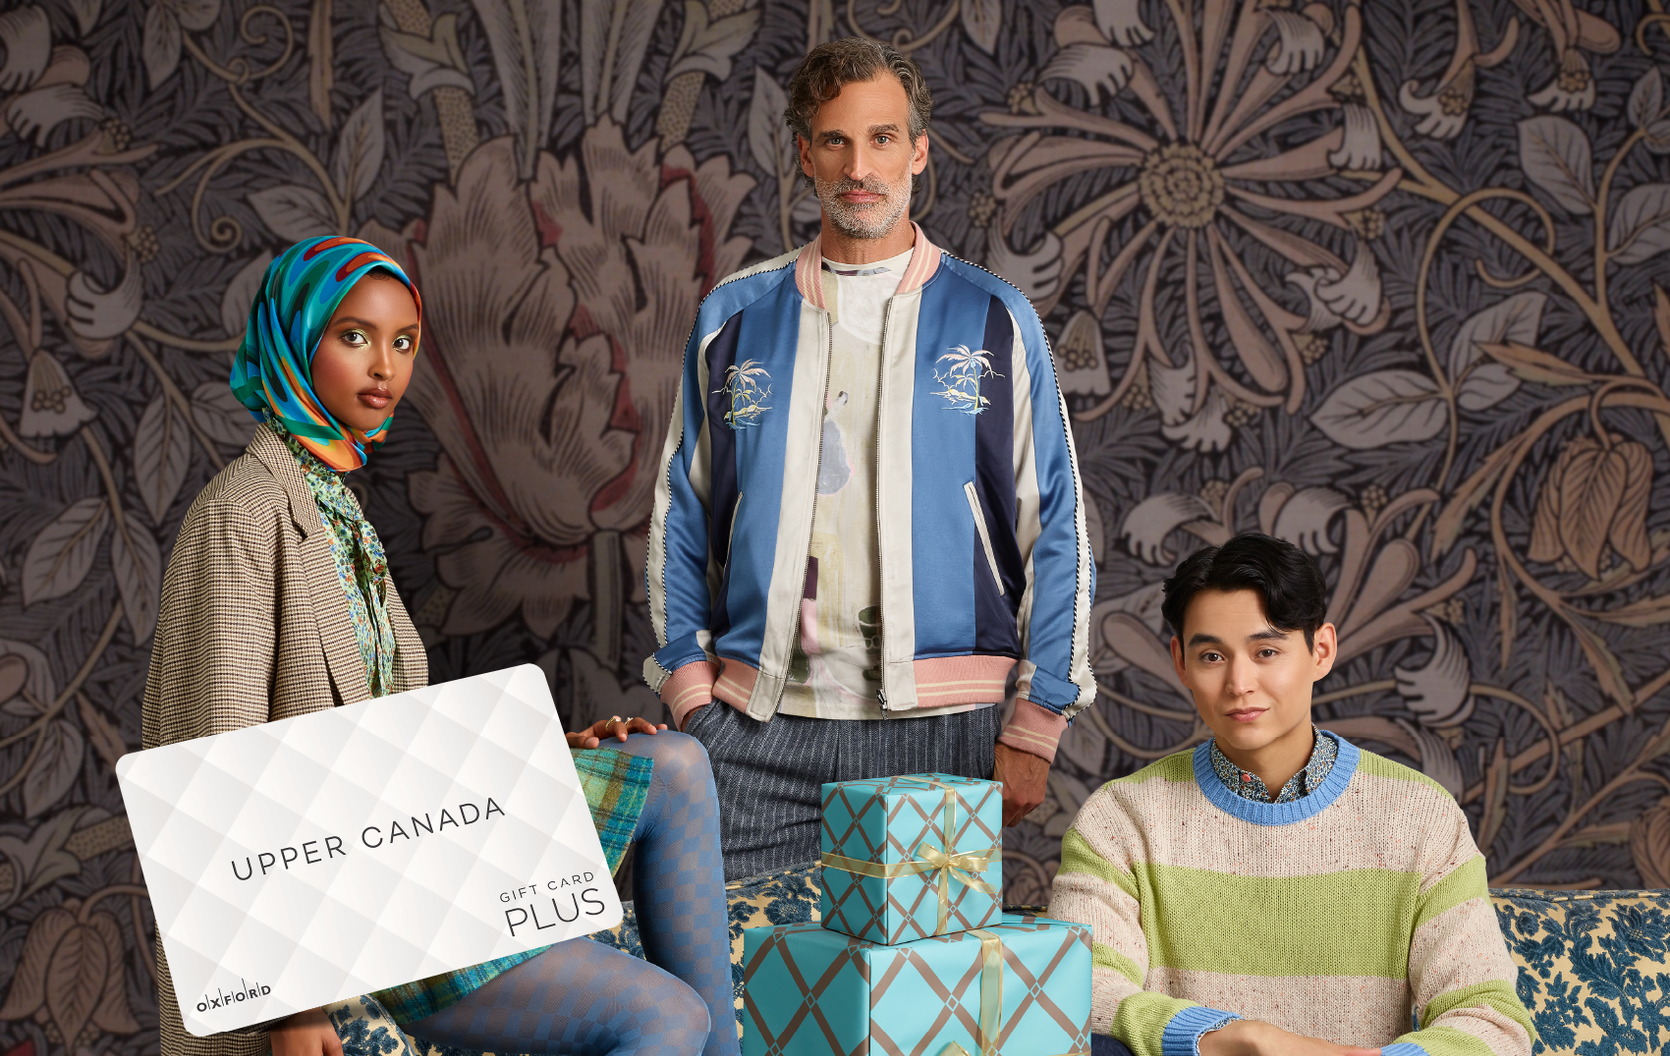 promotional image for a UCM gift card featuring three models posing against a printed backdrop